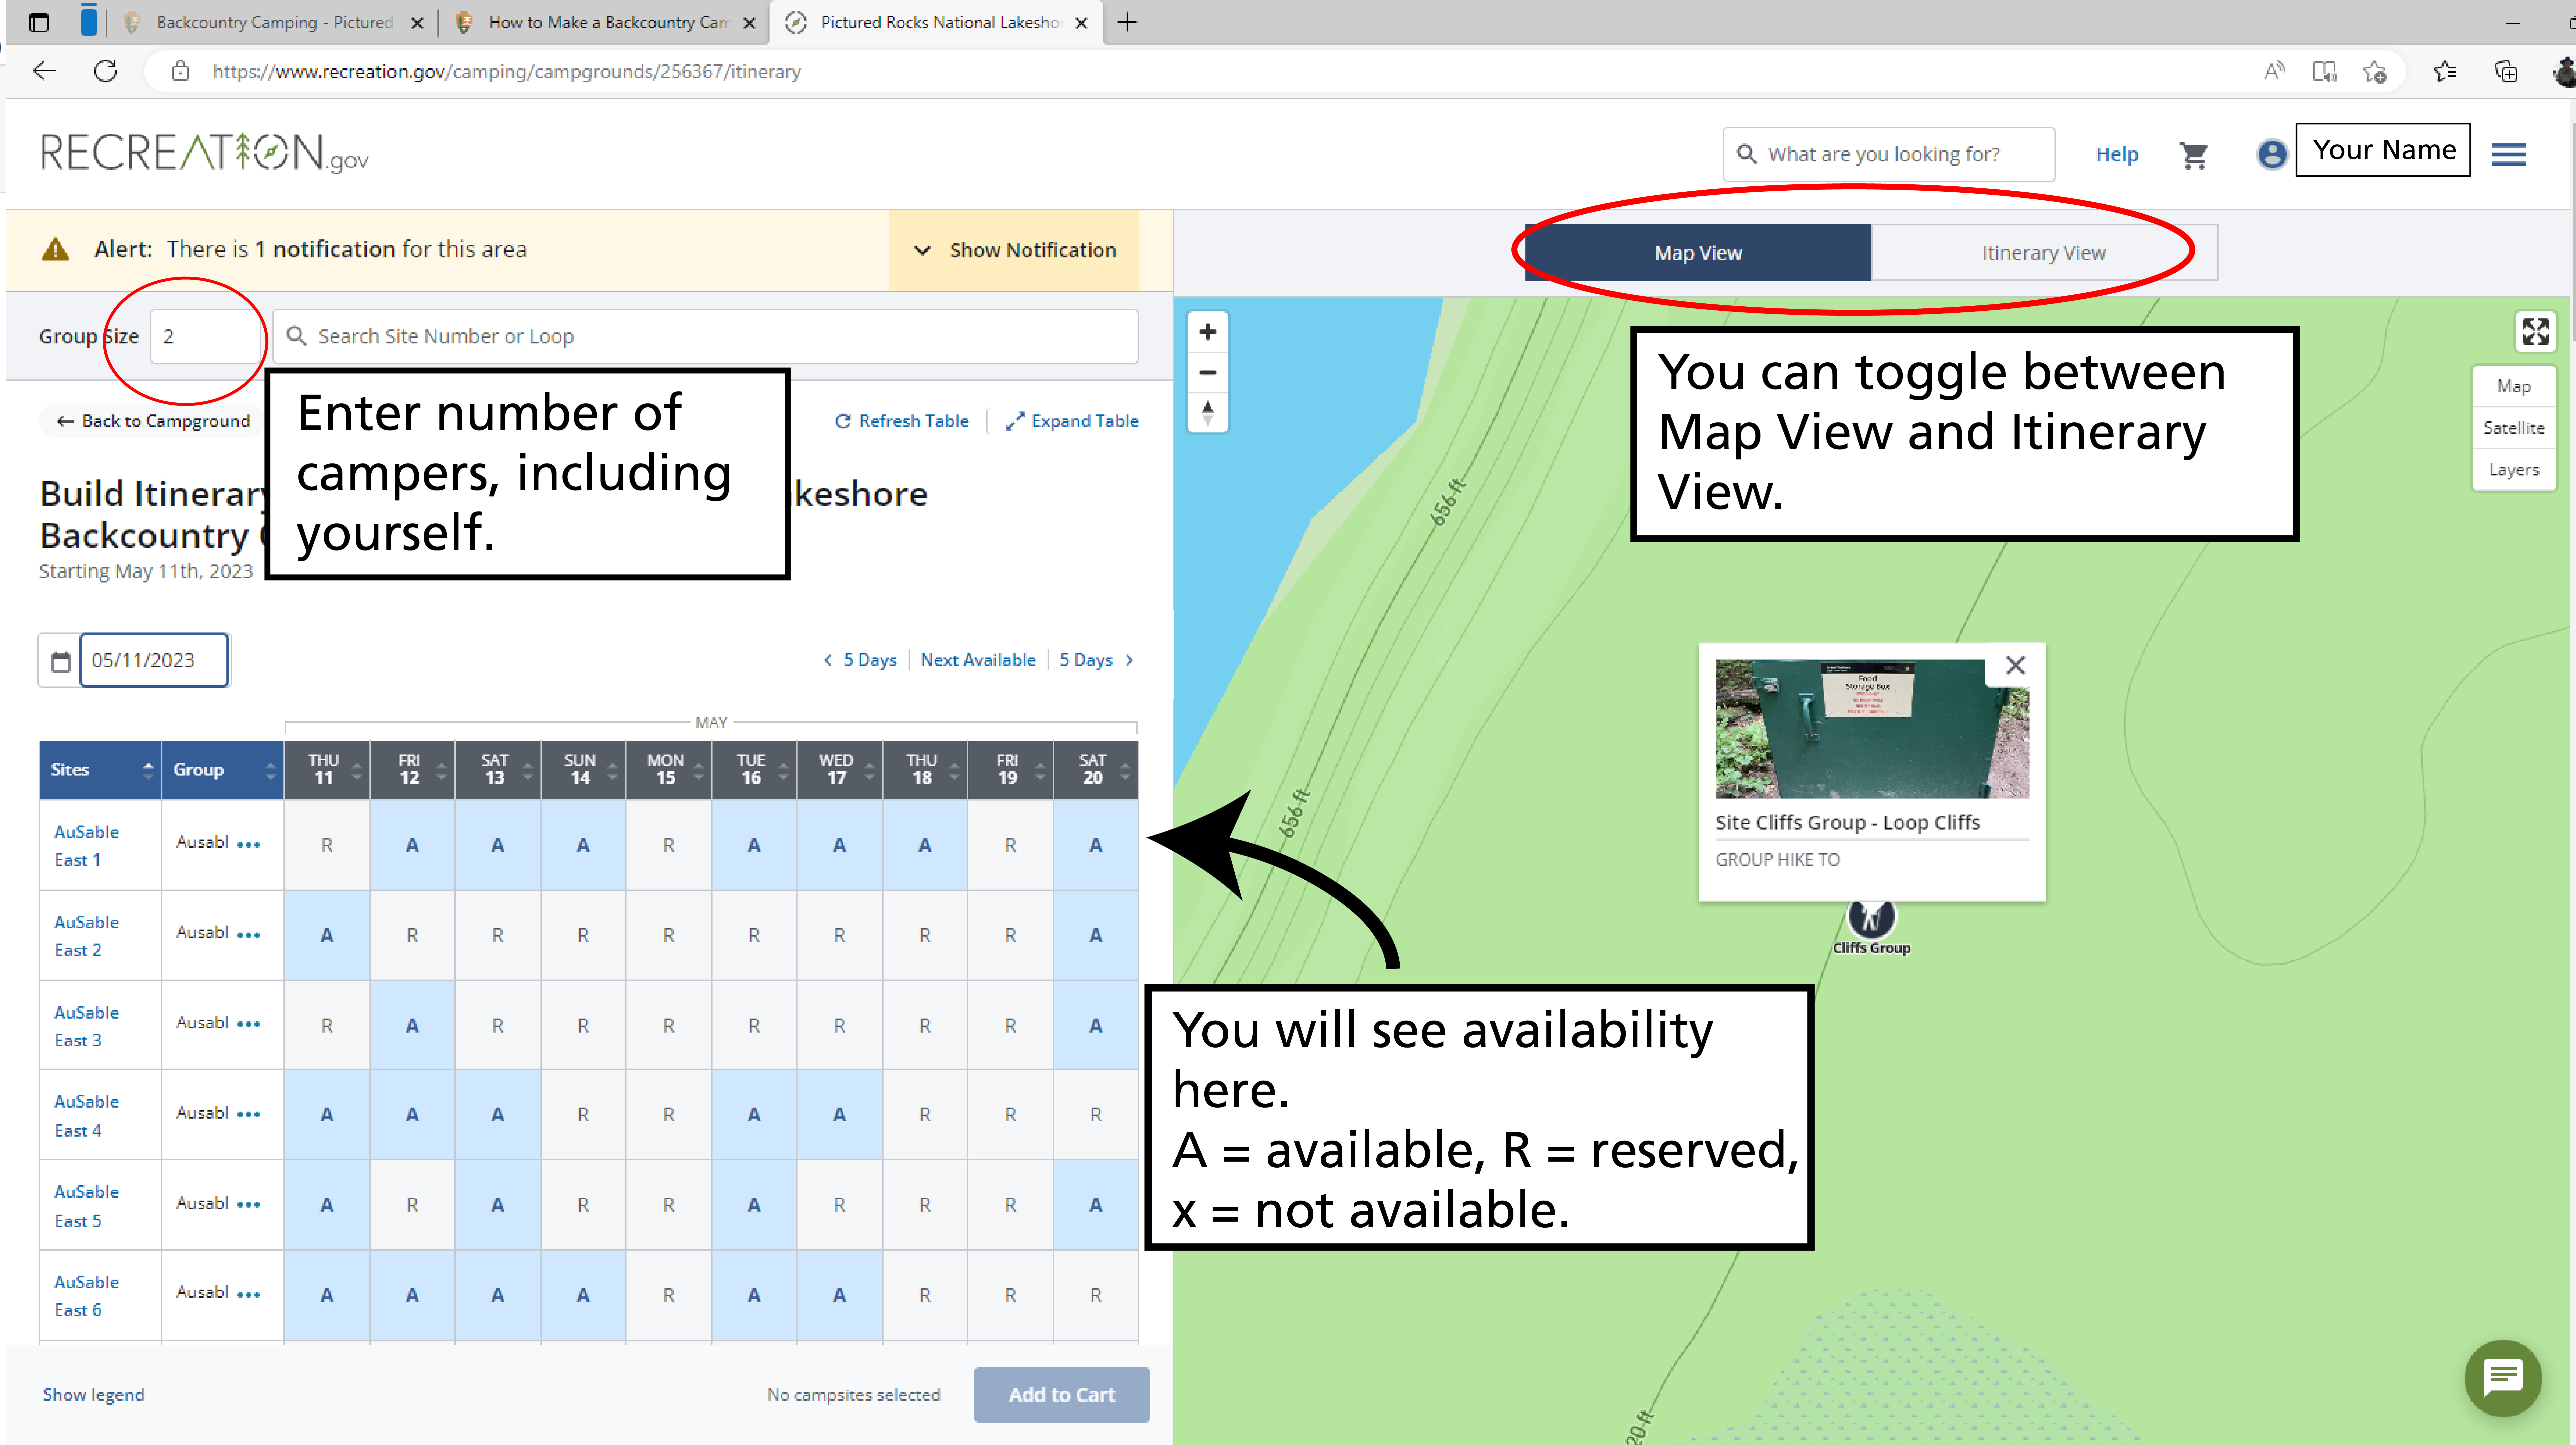 The recreation.gov page showing availability of backcountry sites. Group size is circled, enter number of campers, including yourself. Availability is shown in a grid. You can toggle between map and itinerary view.